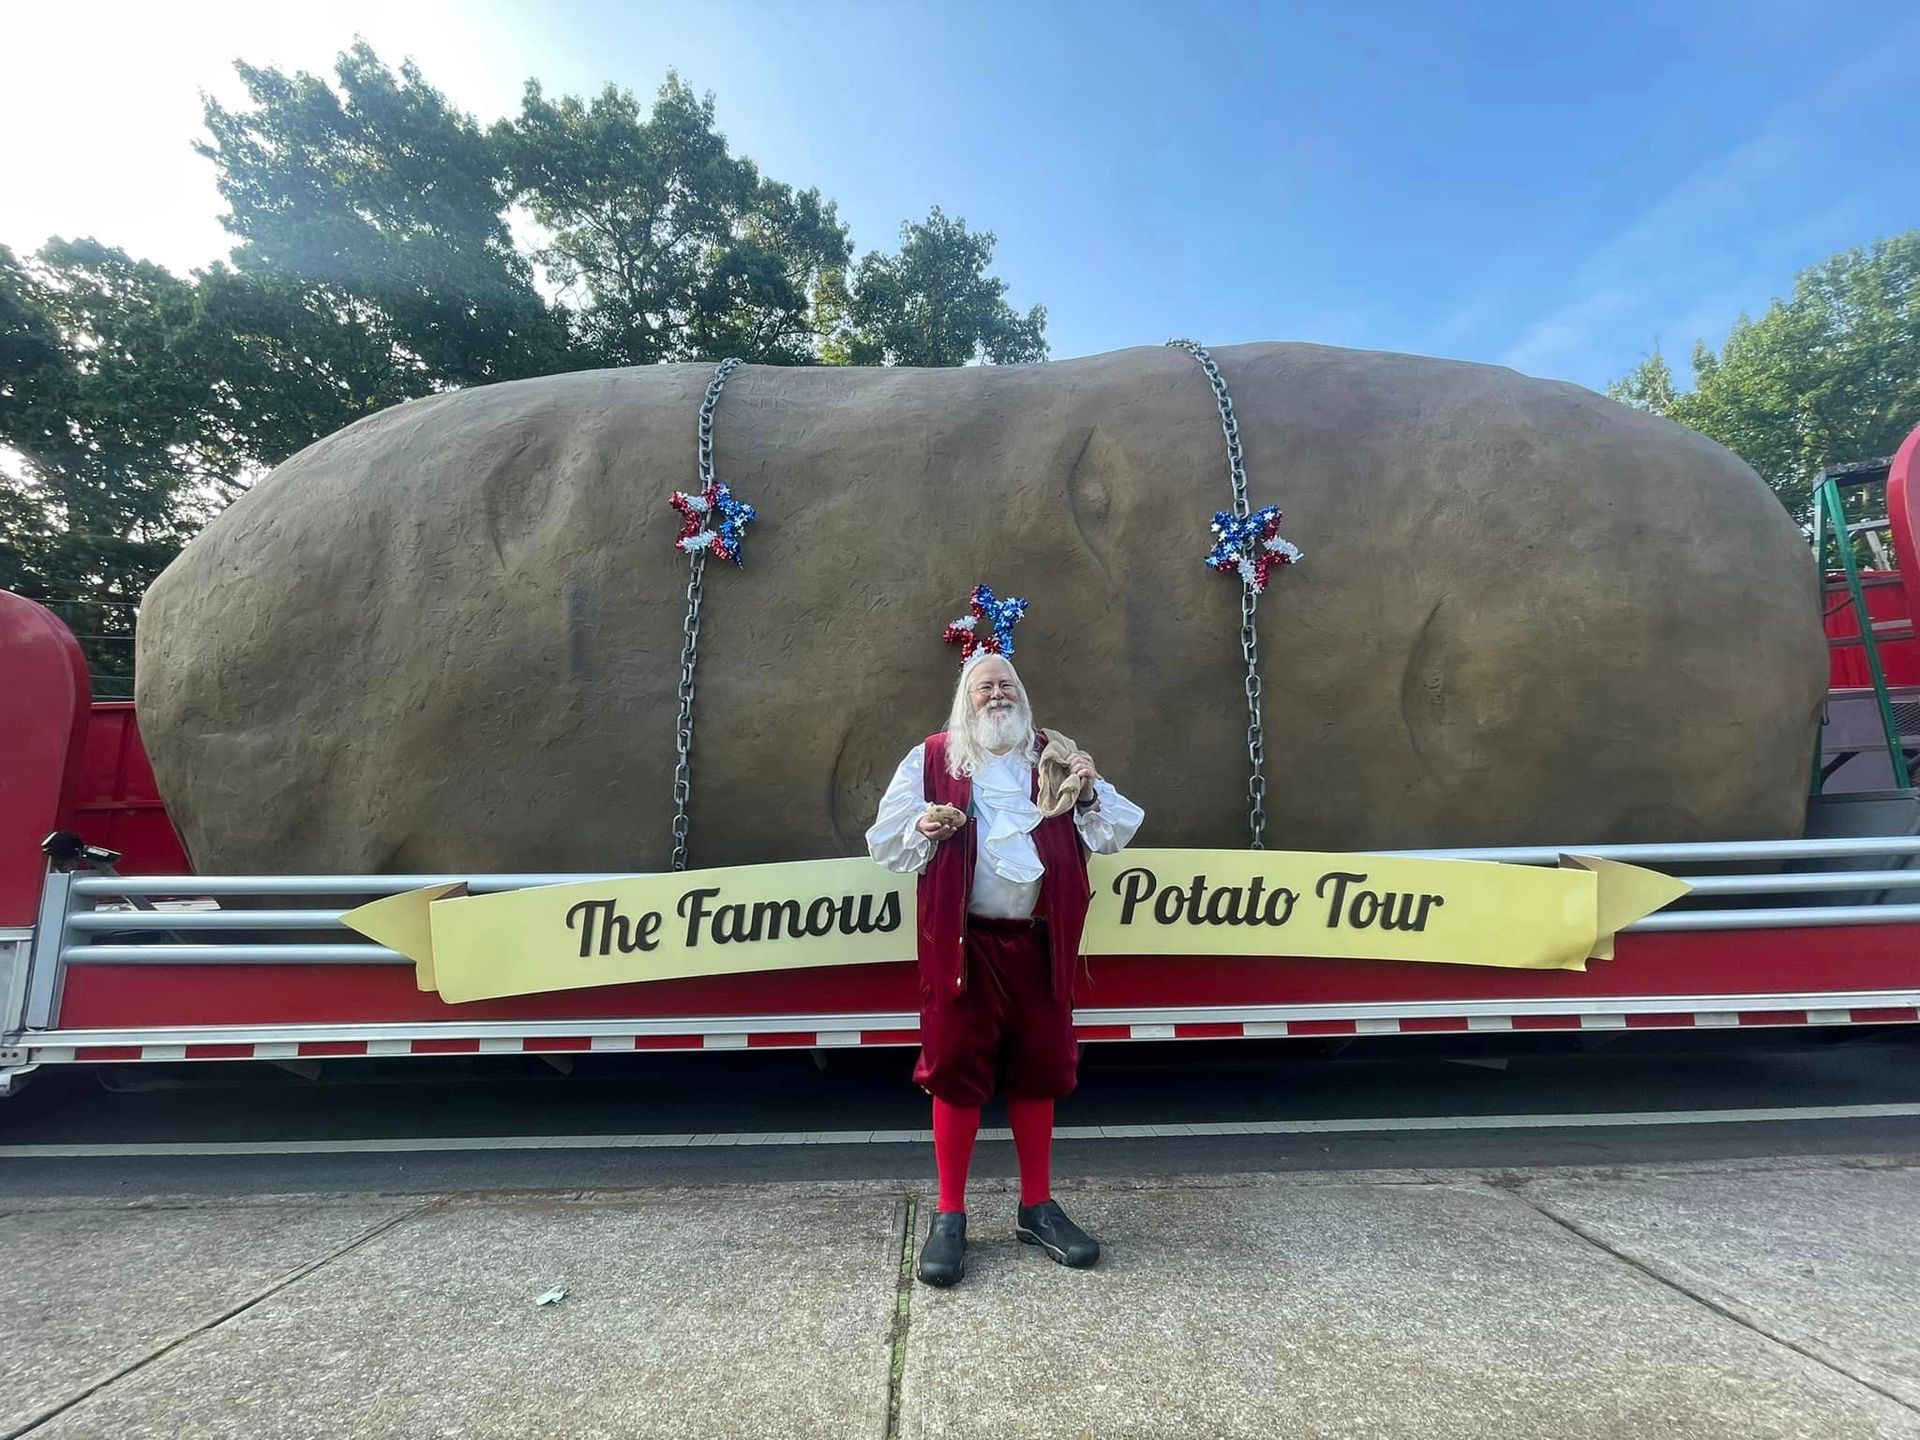 World's Largest Traveling Potato Sculpture, world record from Idaho